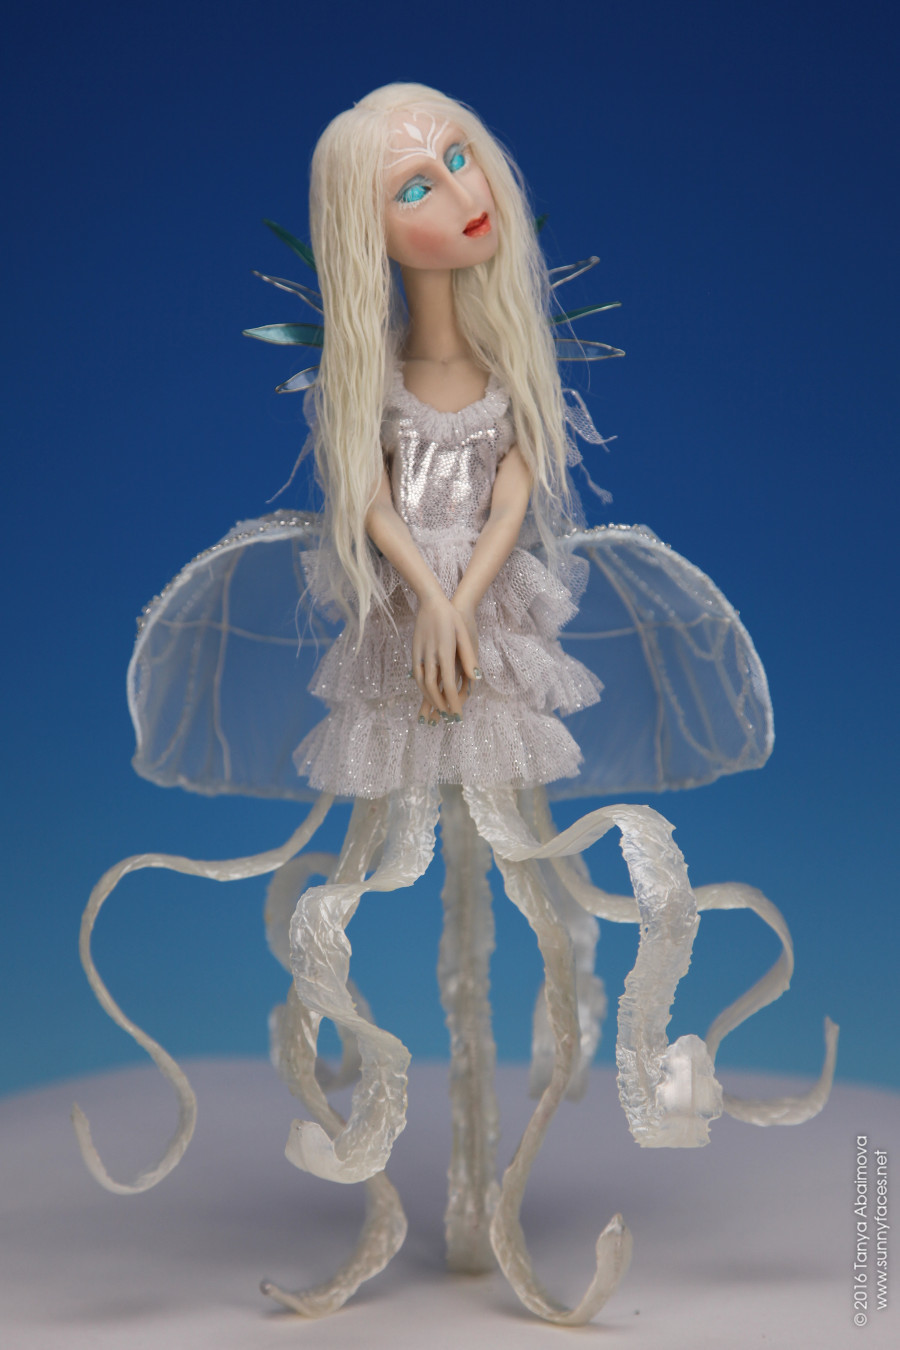 Jelly Fish - One-Of-A-Kind Doll by Tanya Abaimova. Creatures Gallery 